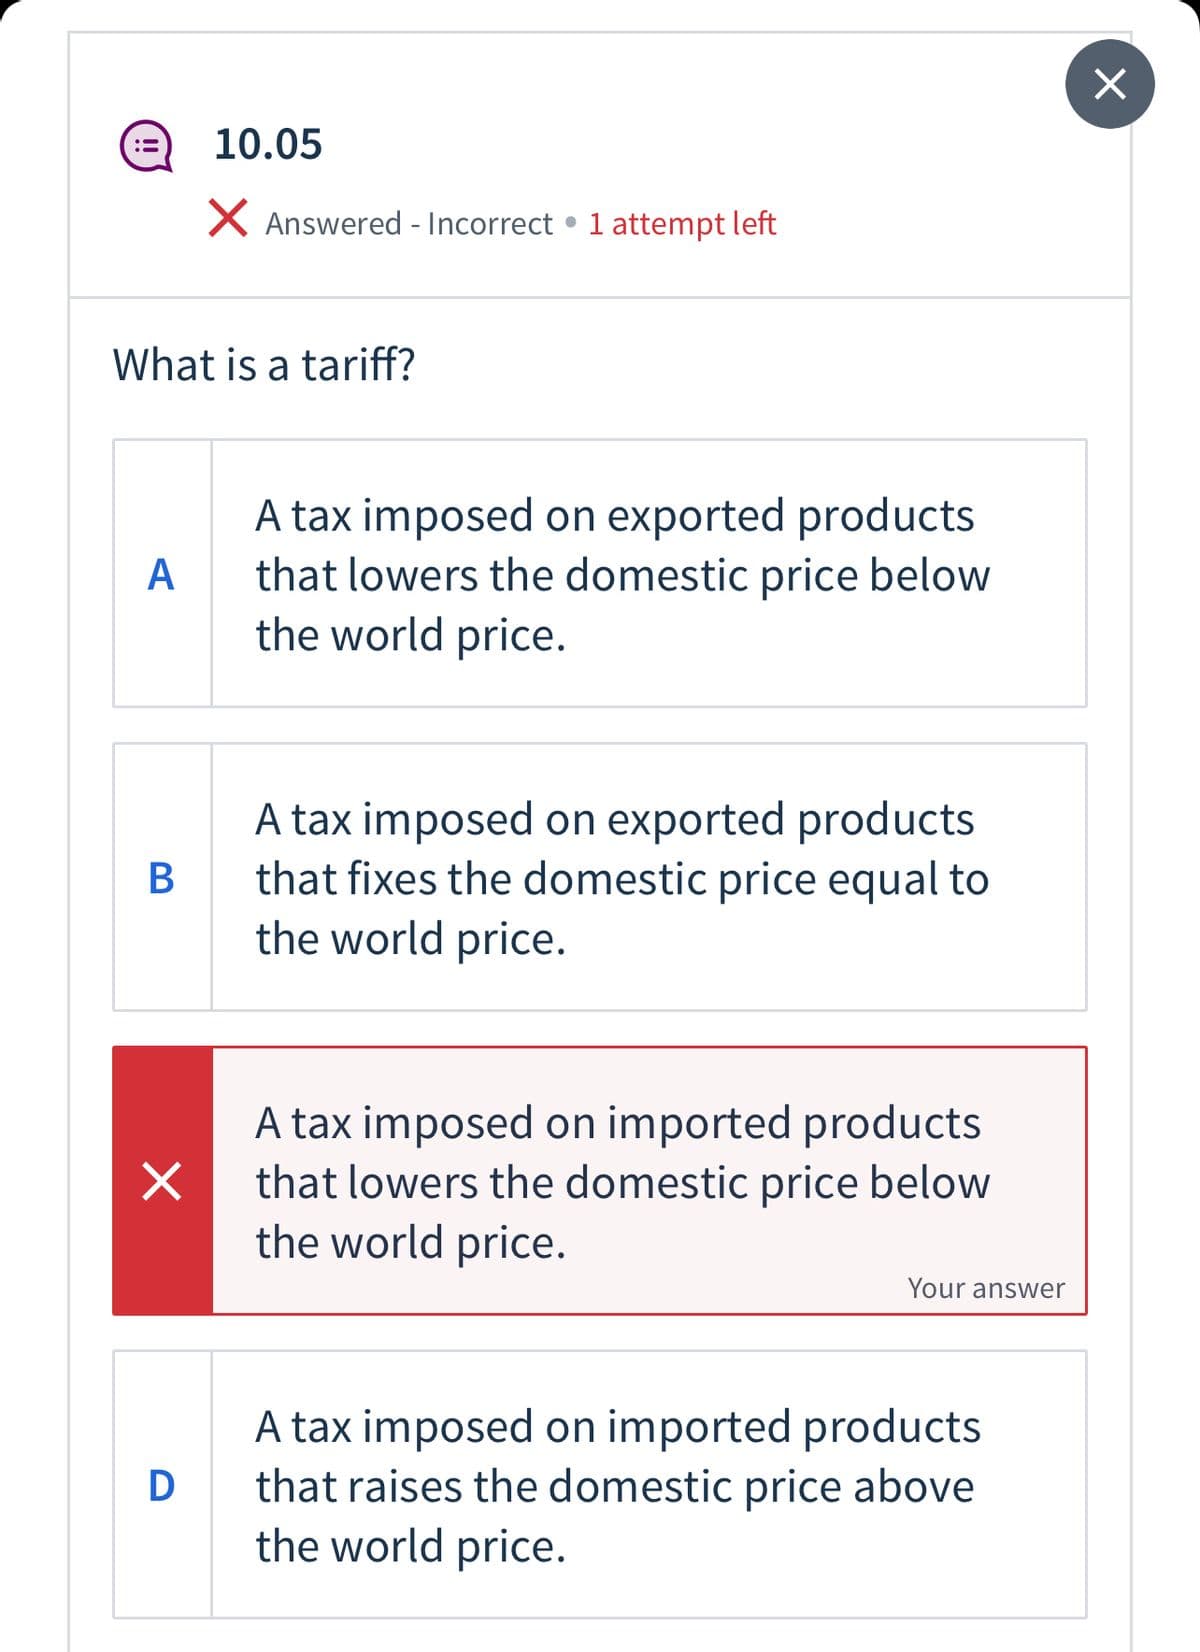 10.05
X Answered - Incorrect • 1 attempt left
What is a tariff?
A tax imposed on exported products
that lowers the domestic price below
the world price.
А
A tax imposed on exported products
that fixes the domestic price equal to
the world price.
В
A tax imposed on imported products
that lowers the domestic price below
the world price.
Your answer
A tax imposed on imported products
that raises the domestic price above
the world price.
